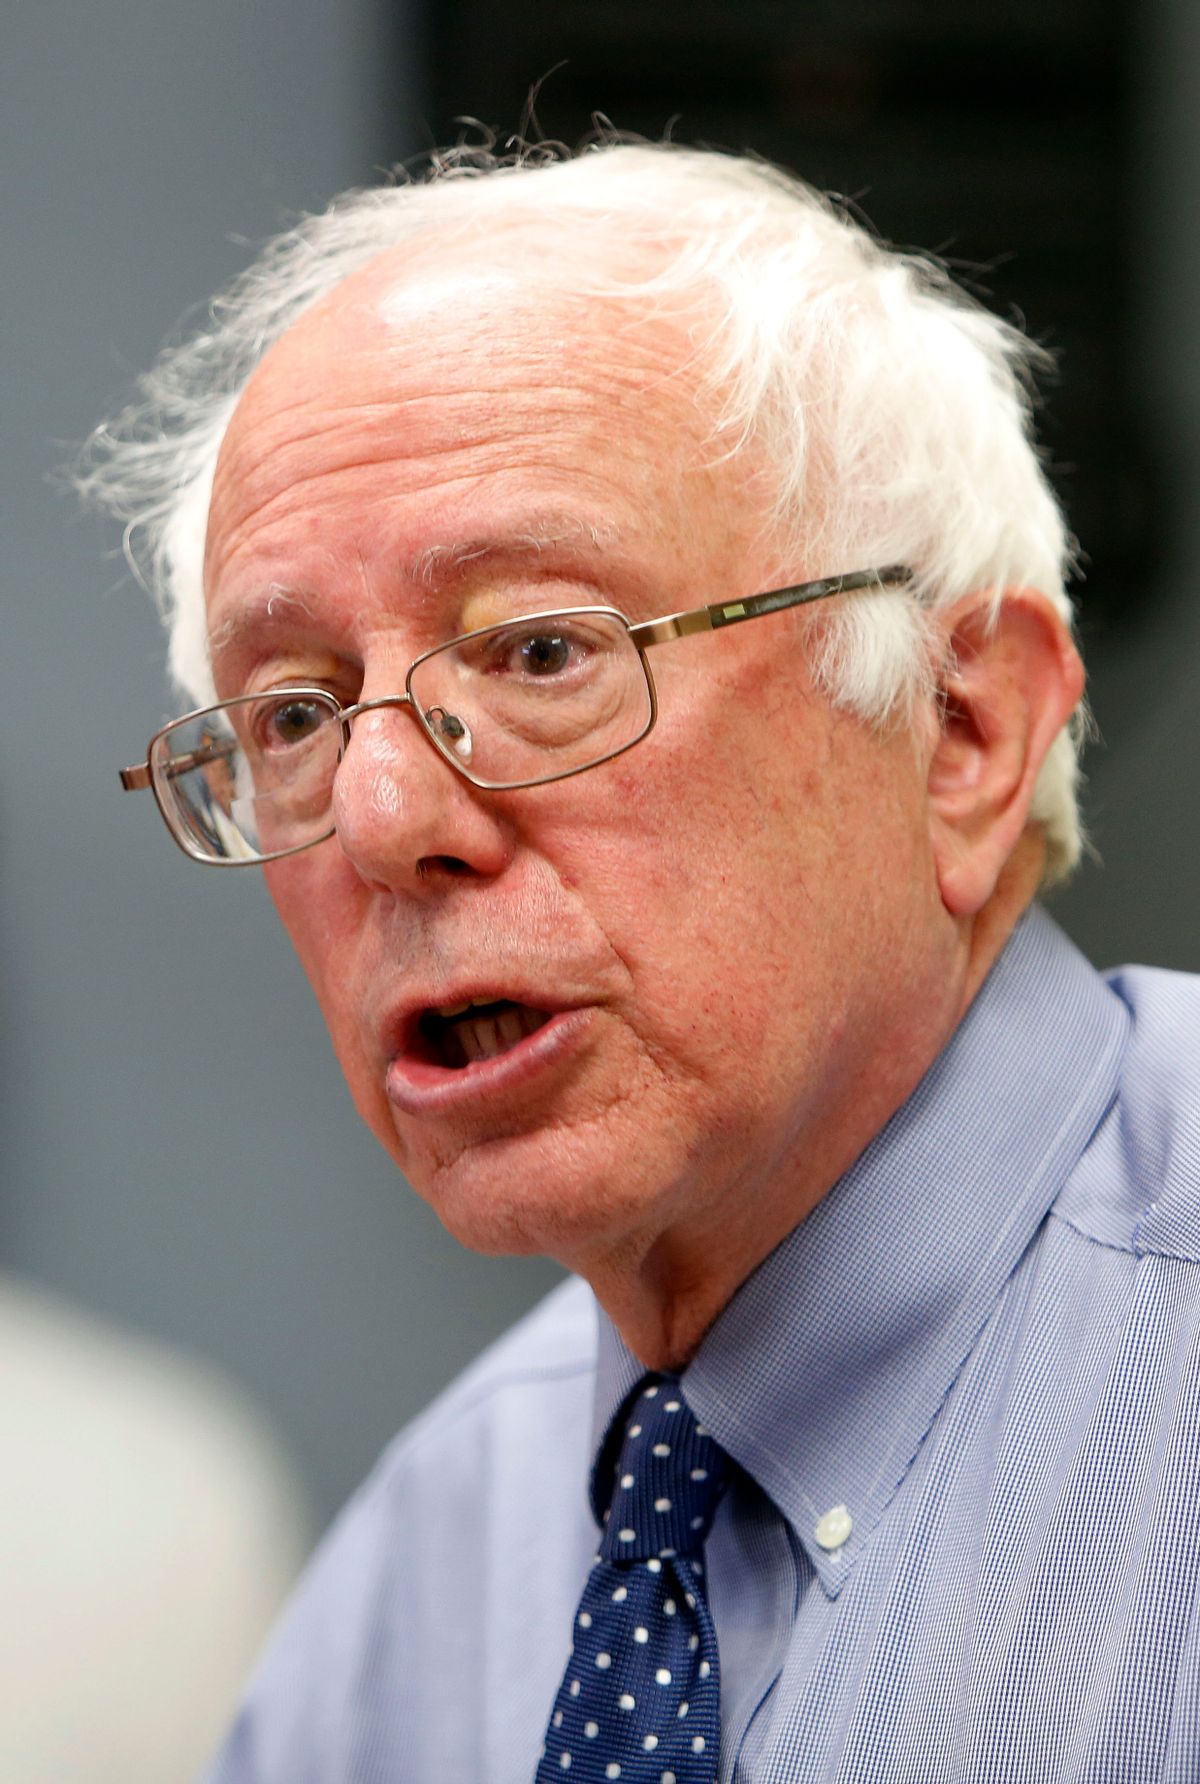 In this May 27, 2015, file photo Democratic presidential candidate Sen. Bernie Sanders, I-Vt, speaks at a town hall style meeting in Concord, N.H. (AP Photo/Jim Cole)   (AP)